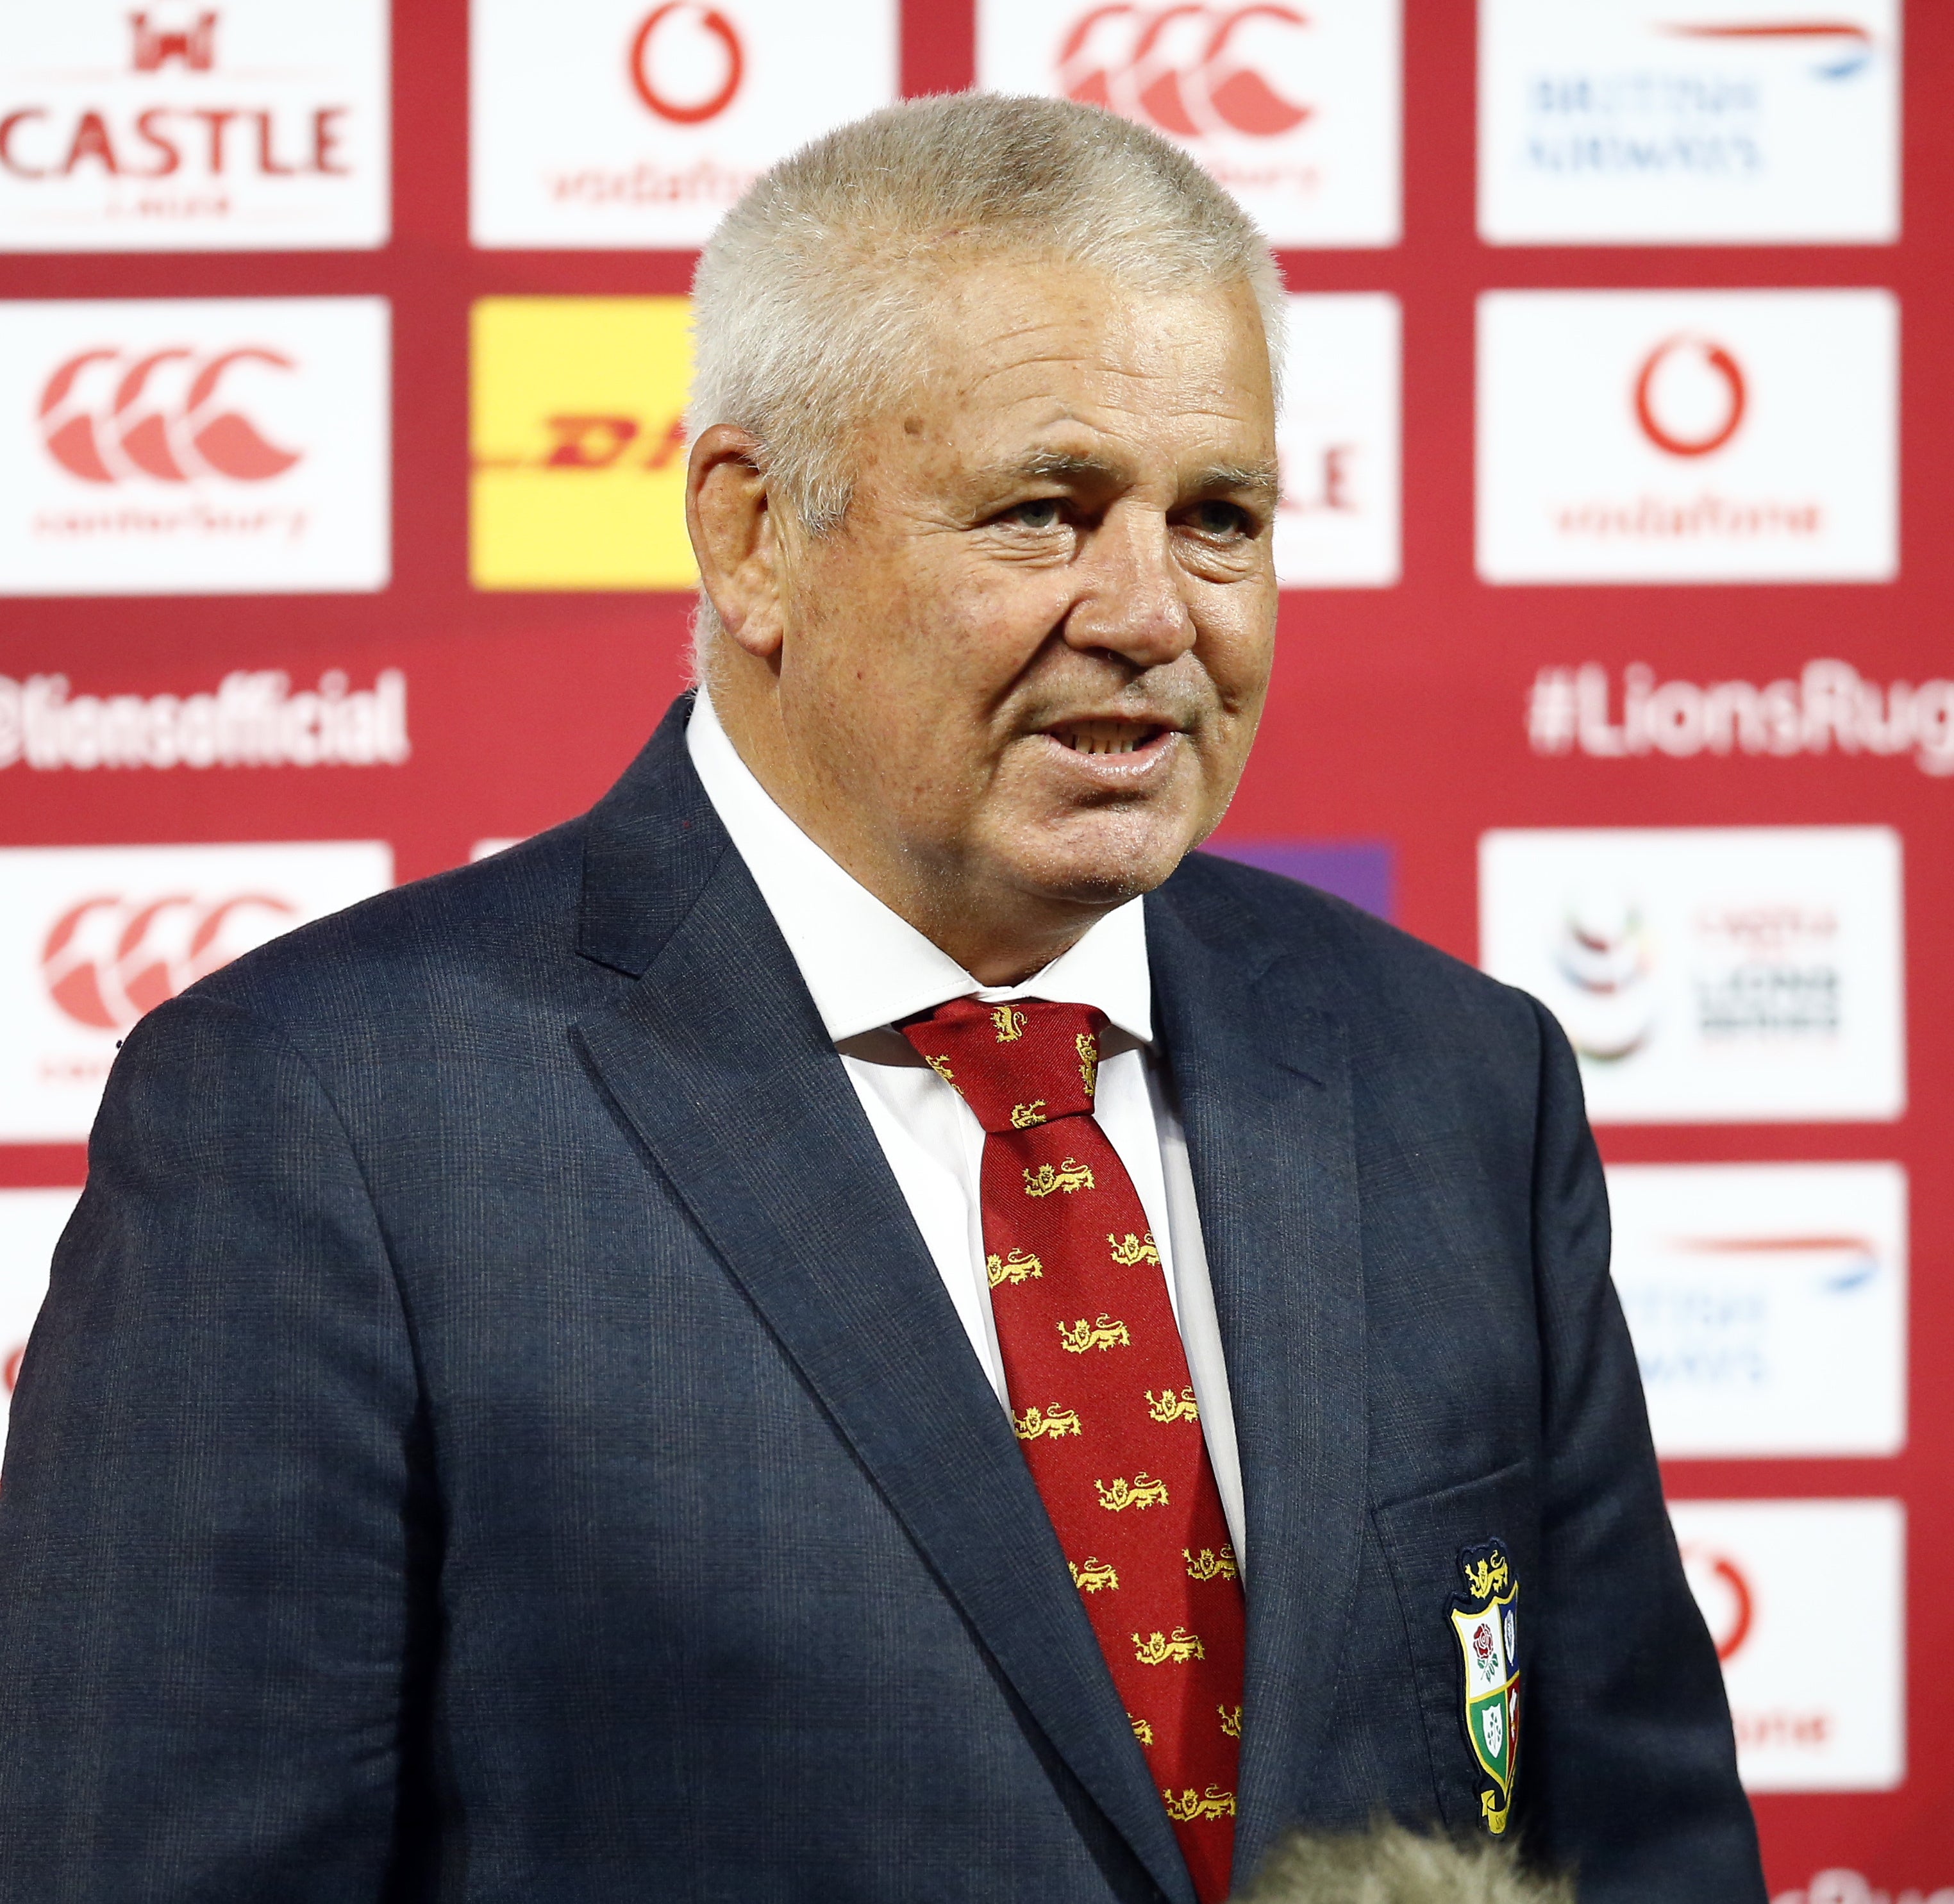 Lions boss Warren Gatland says the Lions tour is likely to finish in Cape Town